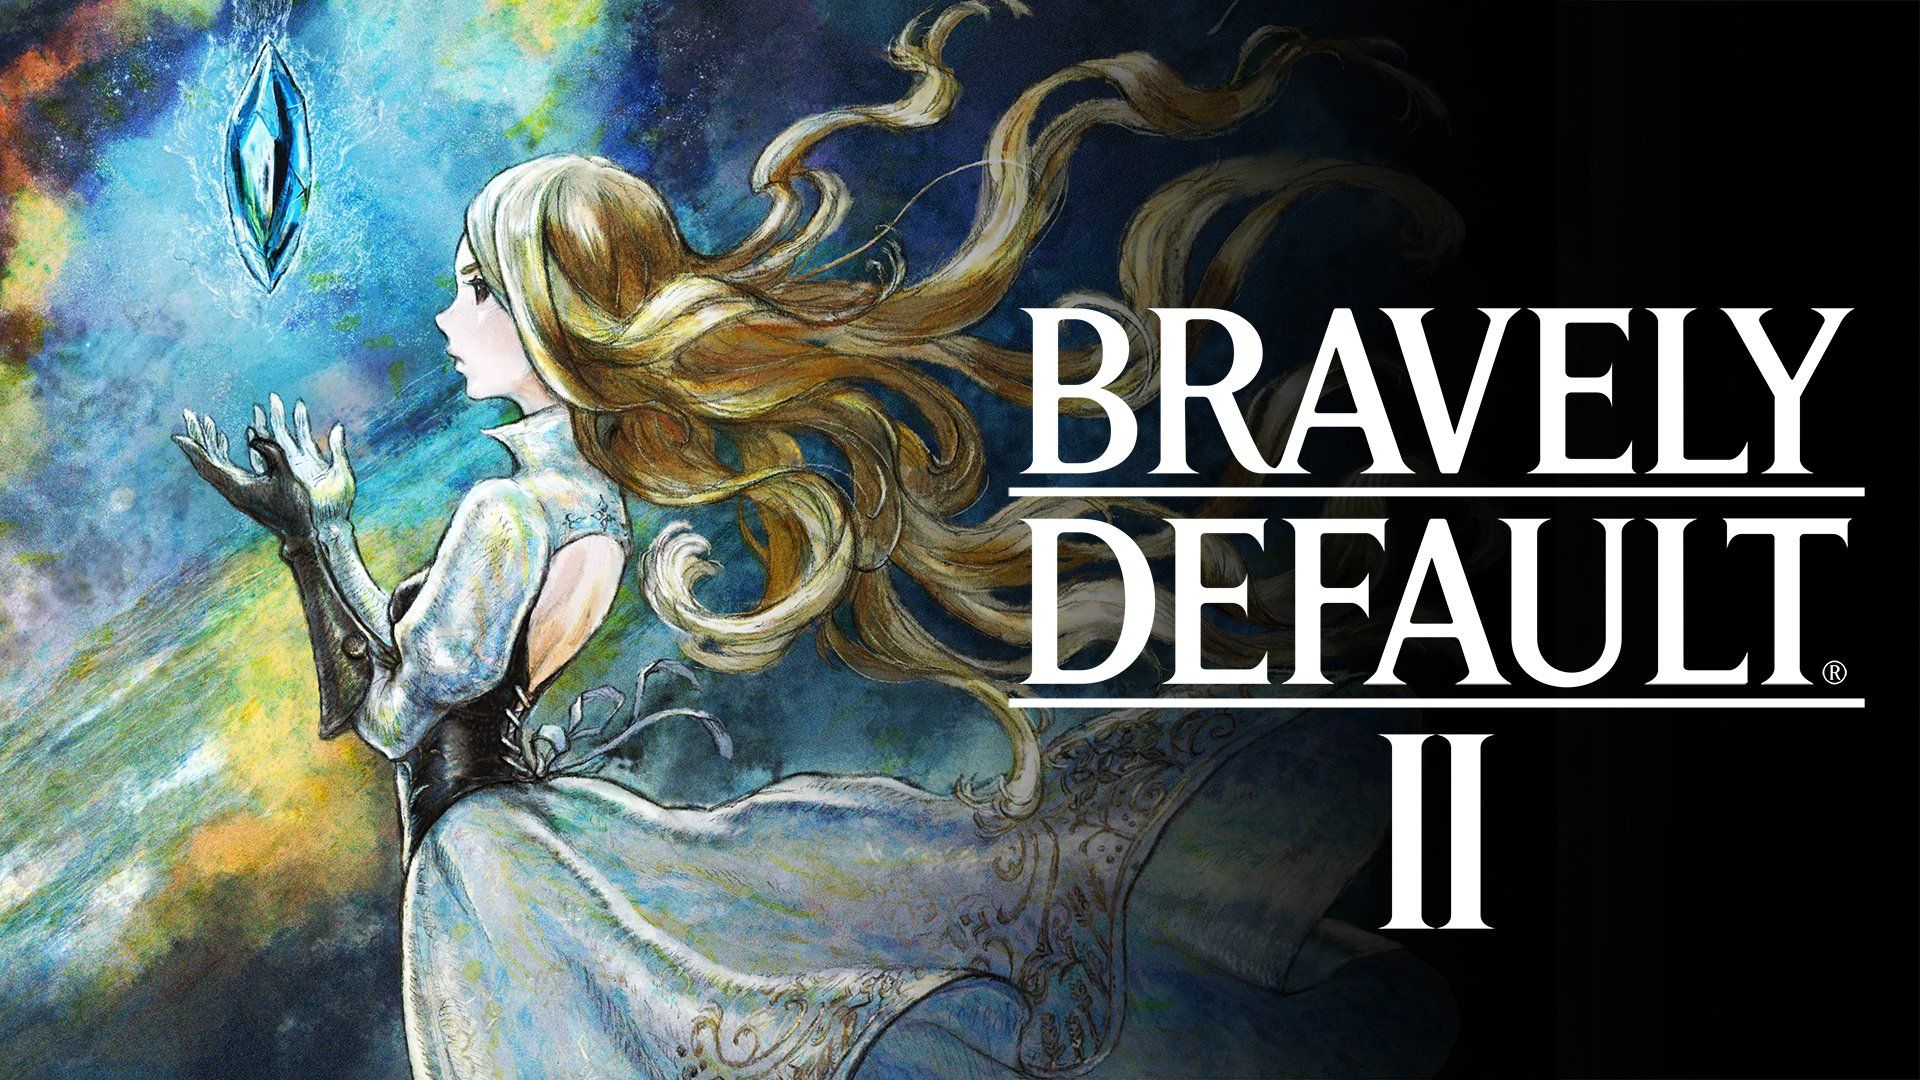 Nintendo of America demo version of #BravelyDefault II will launch today! In the near future, a survey will be conducted to gather your feedback in an effort to incorporate